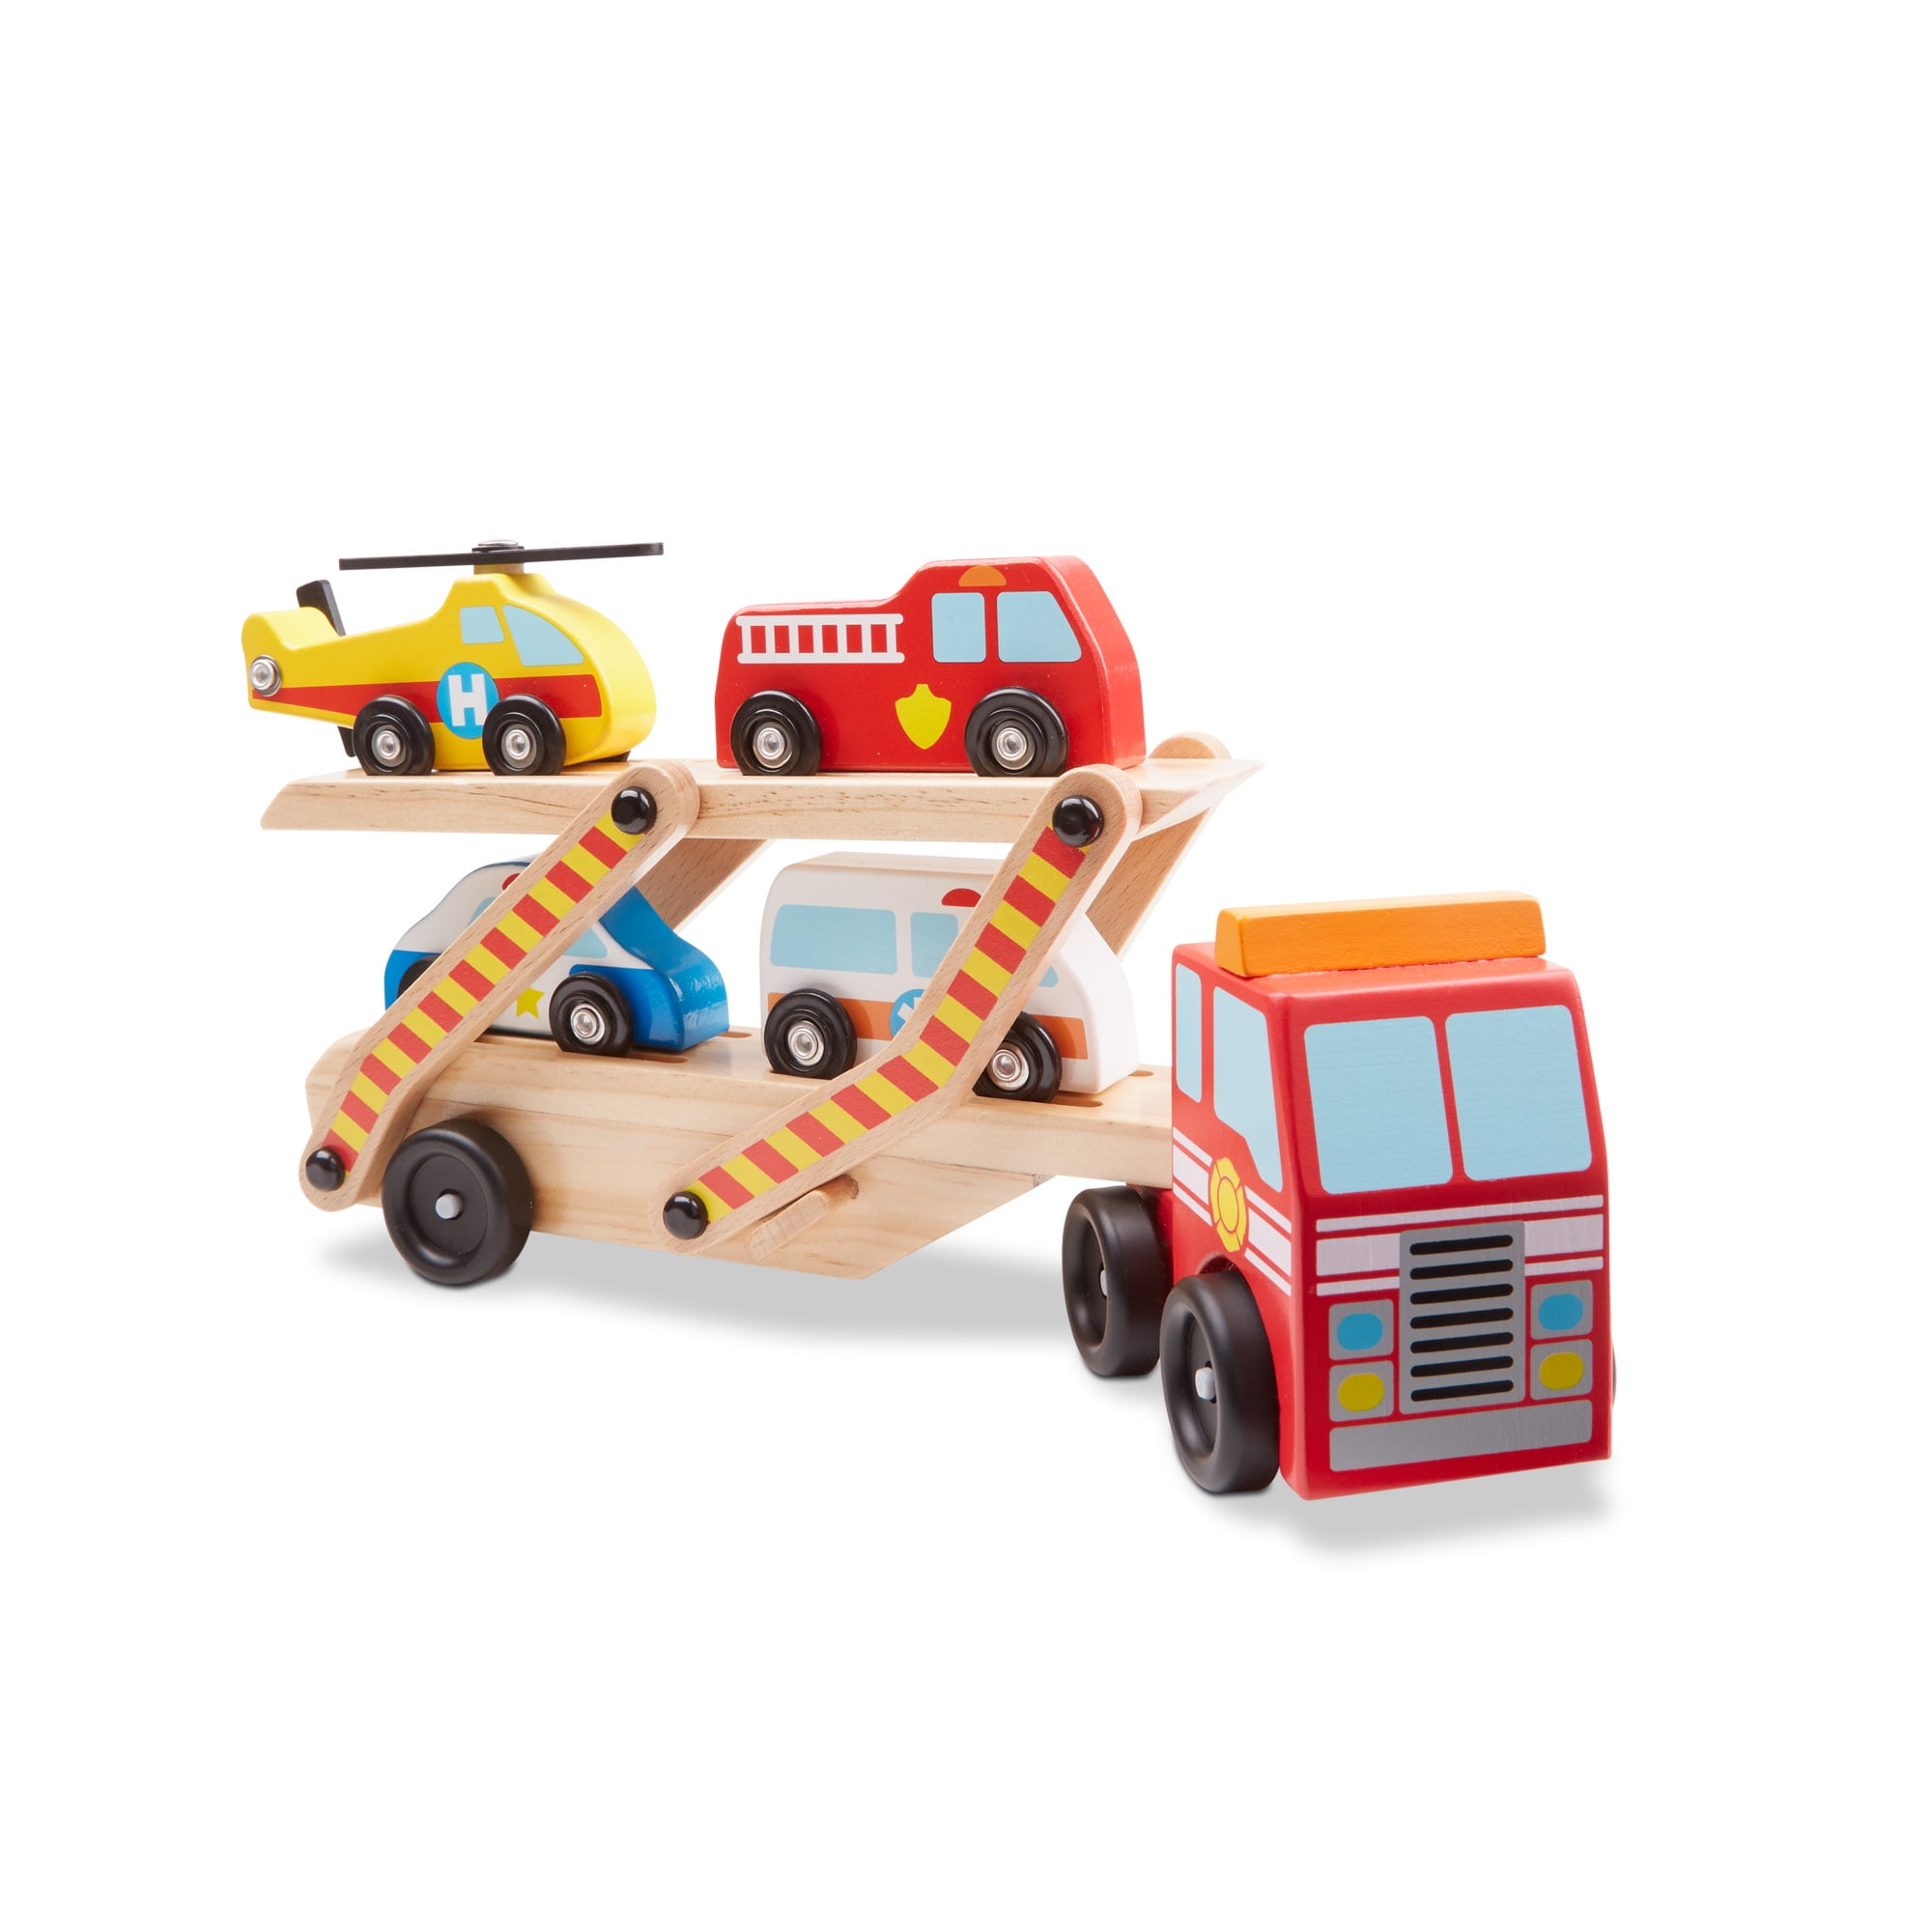 Melissa & Doug Shape-Sorting Wooden Dump Truck Toy With 9 Colorful 